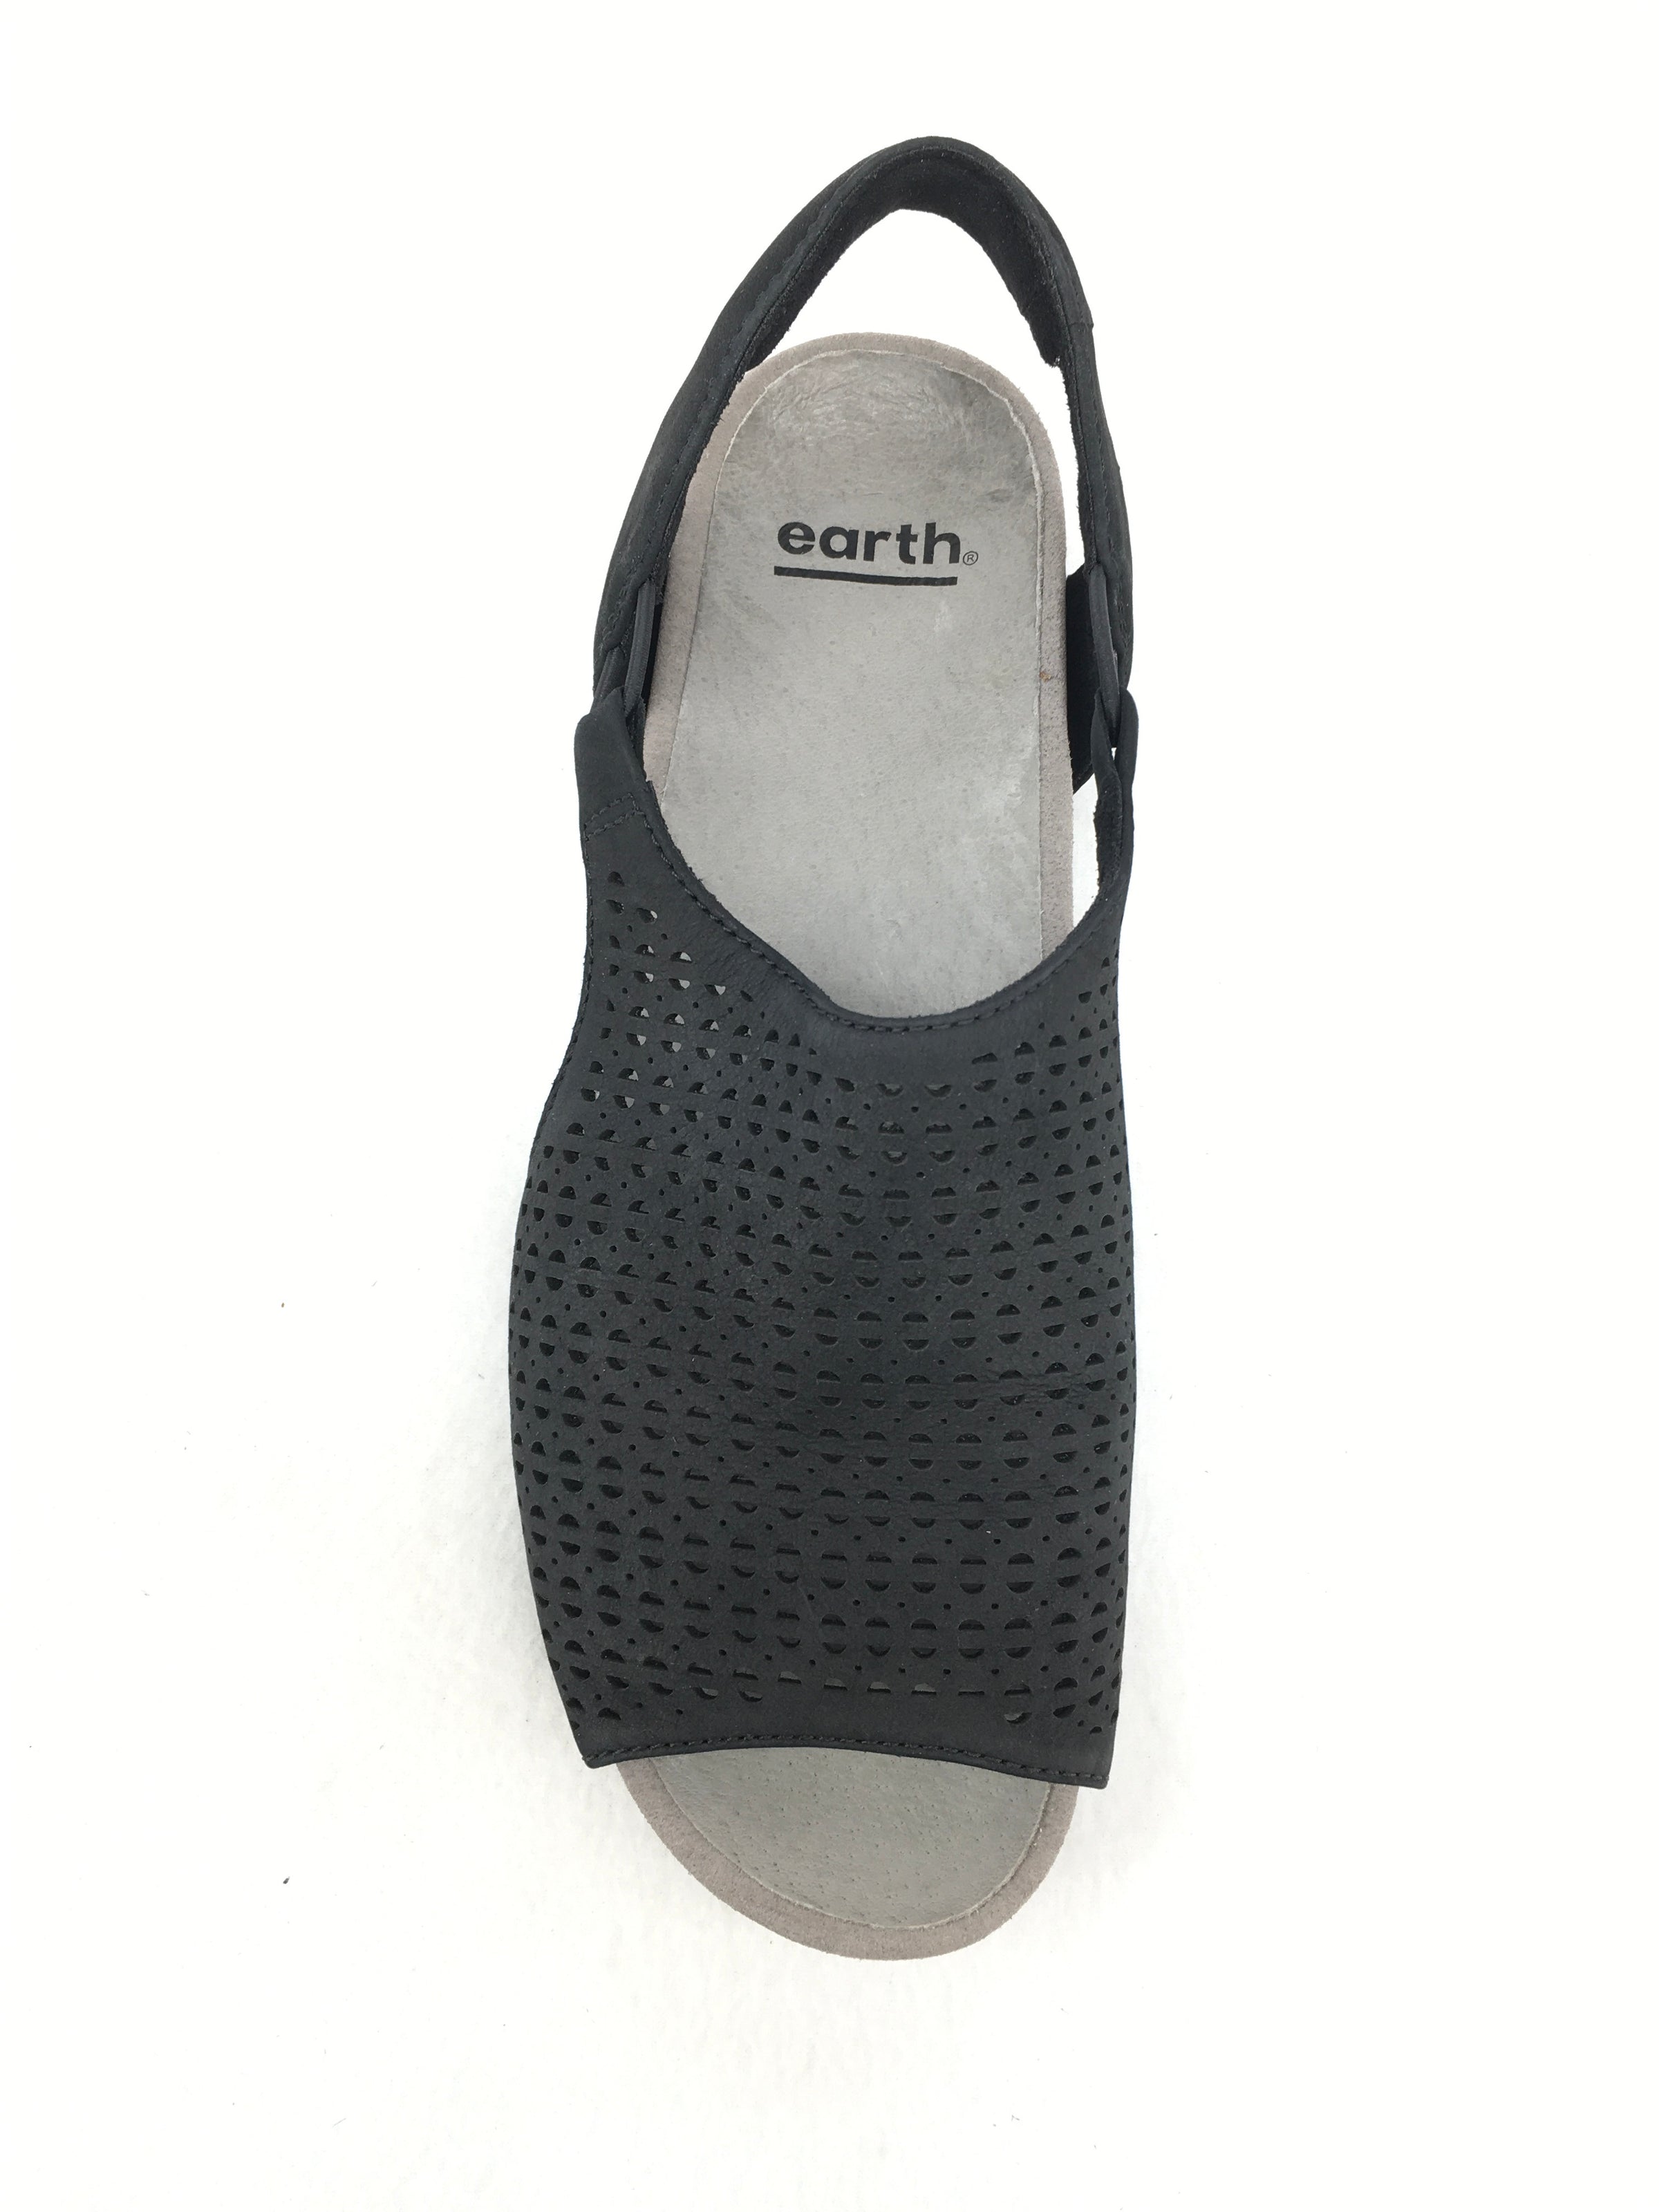 Earth Comfort Sandals Size 8.5M